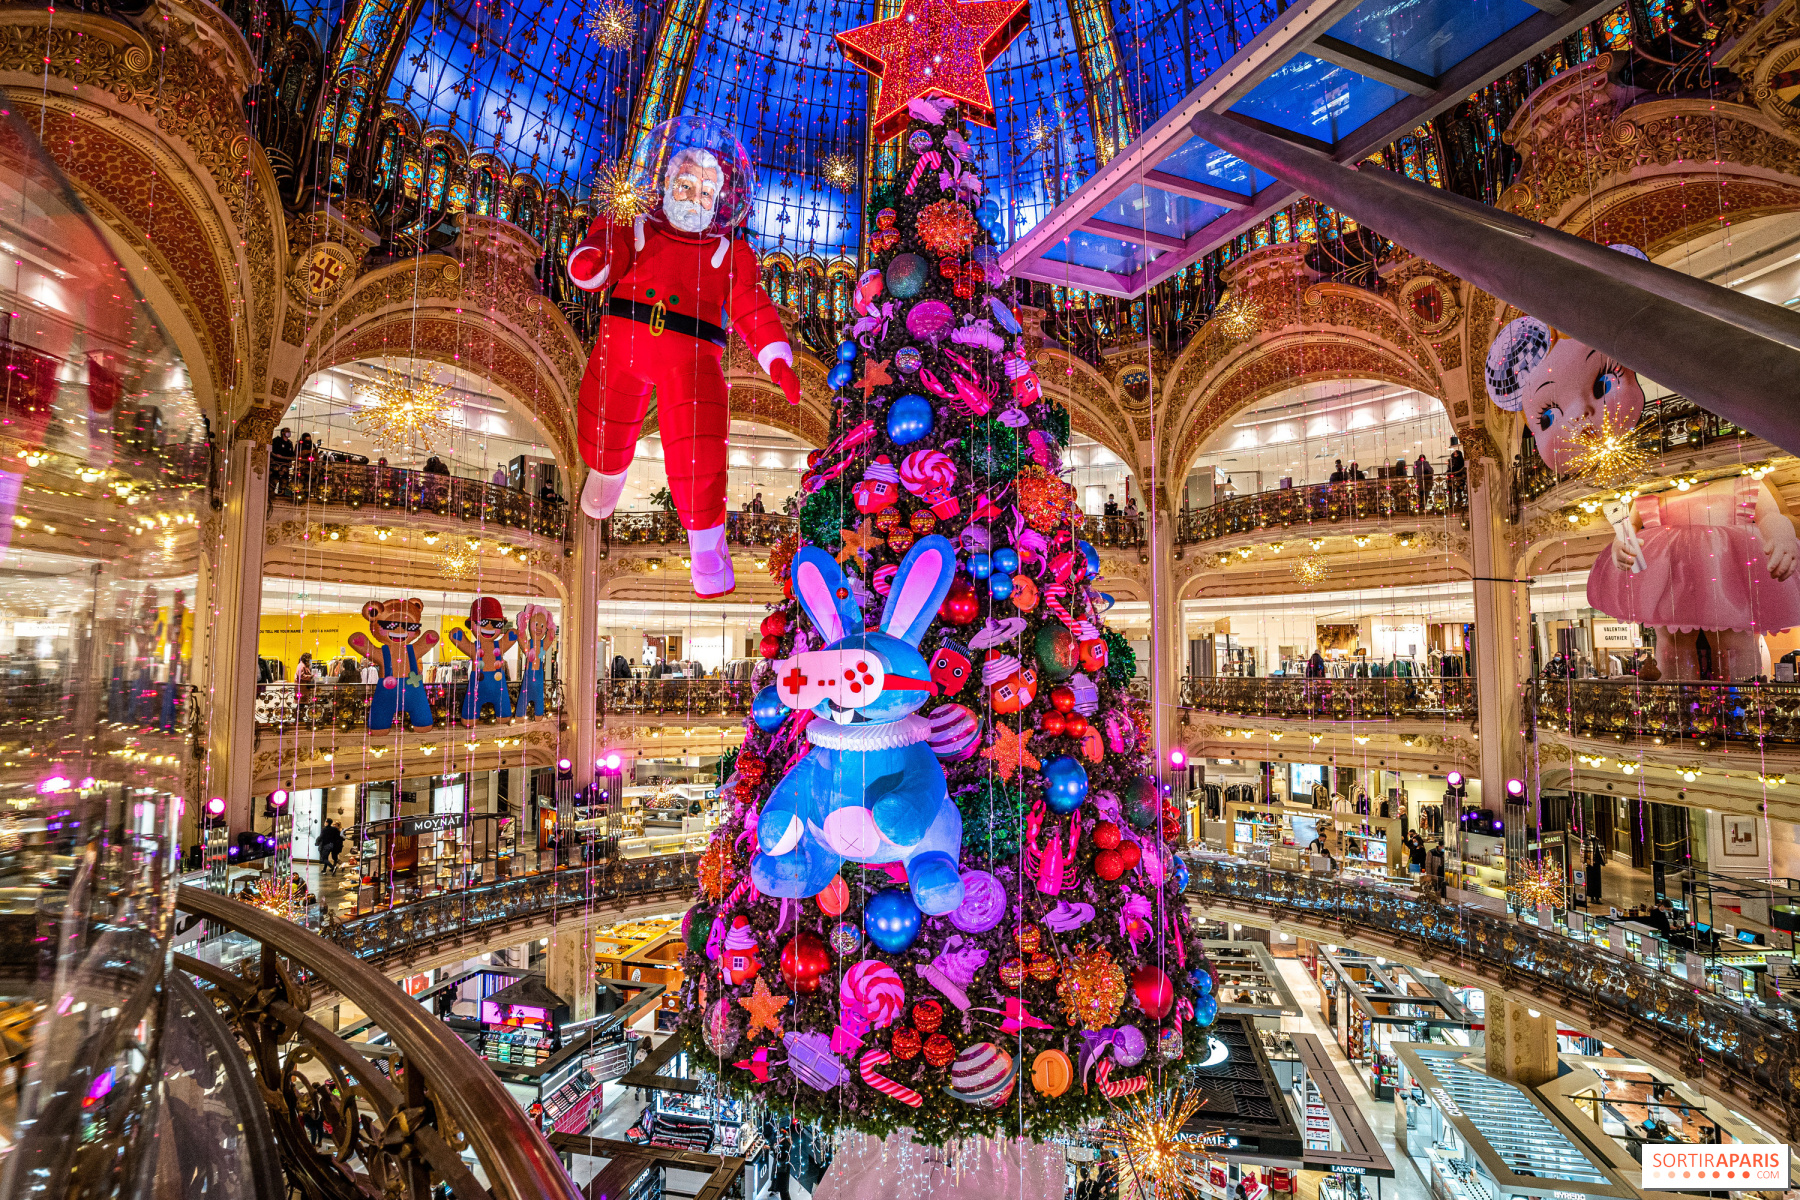 The Cool Hunter - Louis Vuitton Xmas Tree designee by fayedreamsalot for  their Paris store.